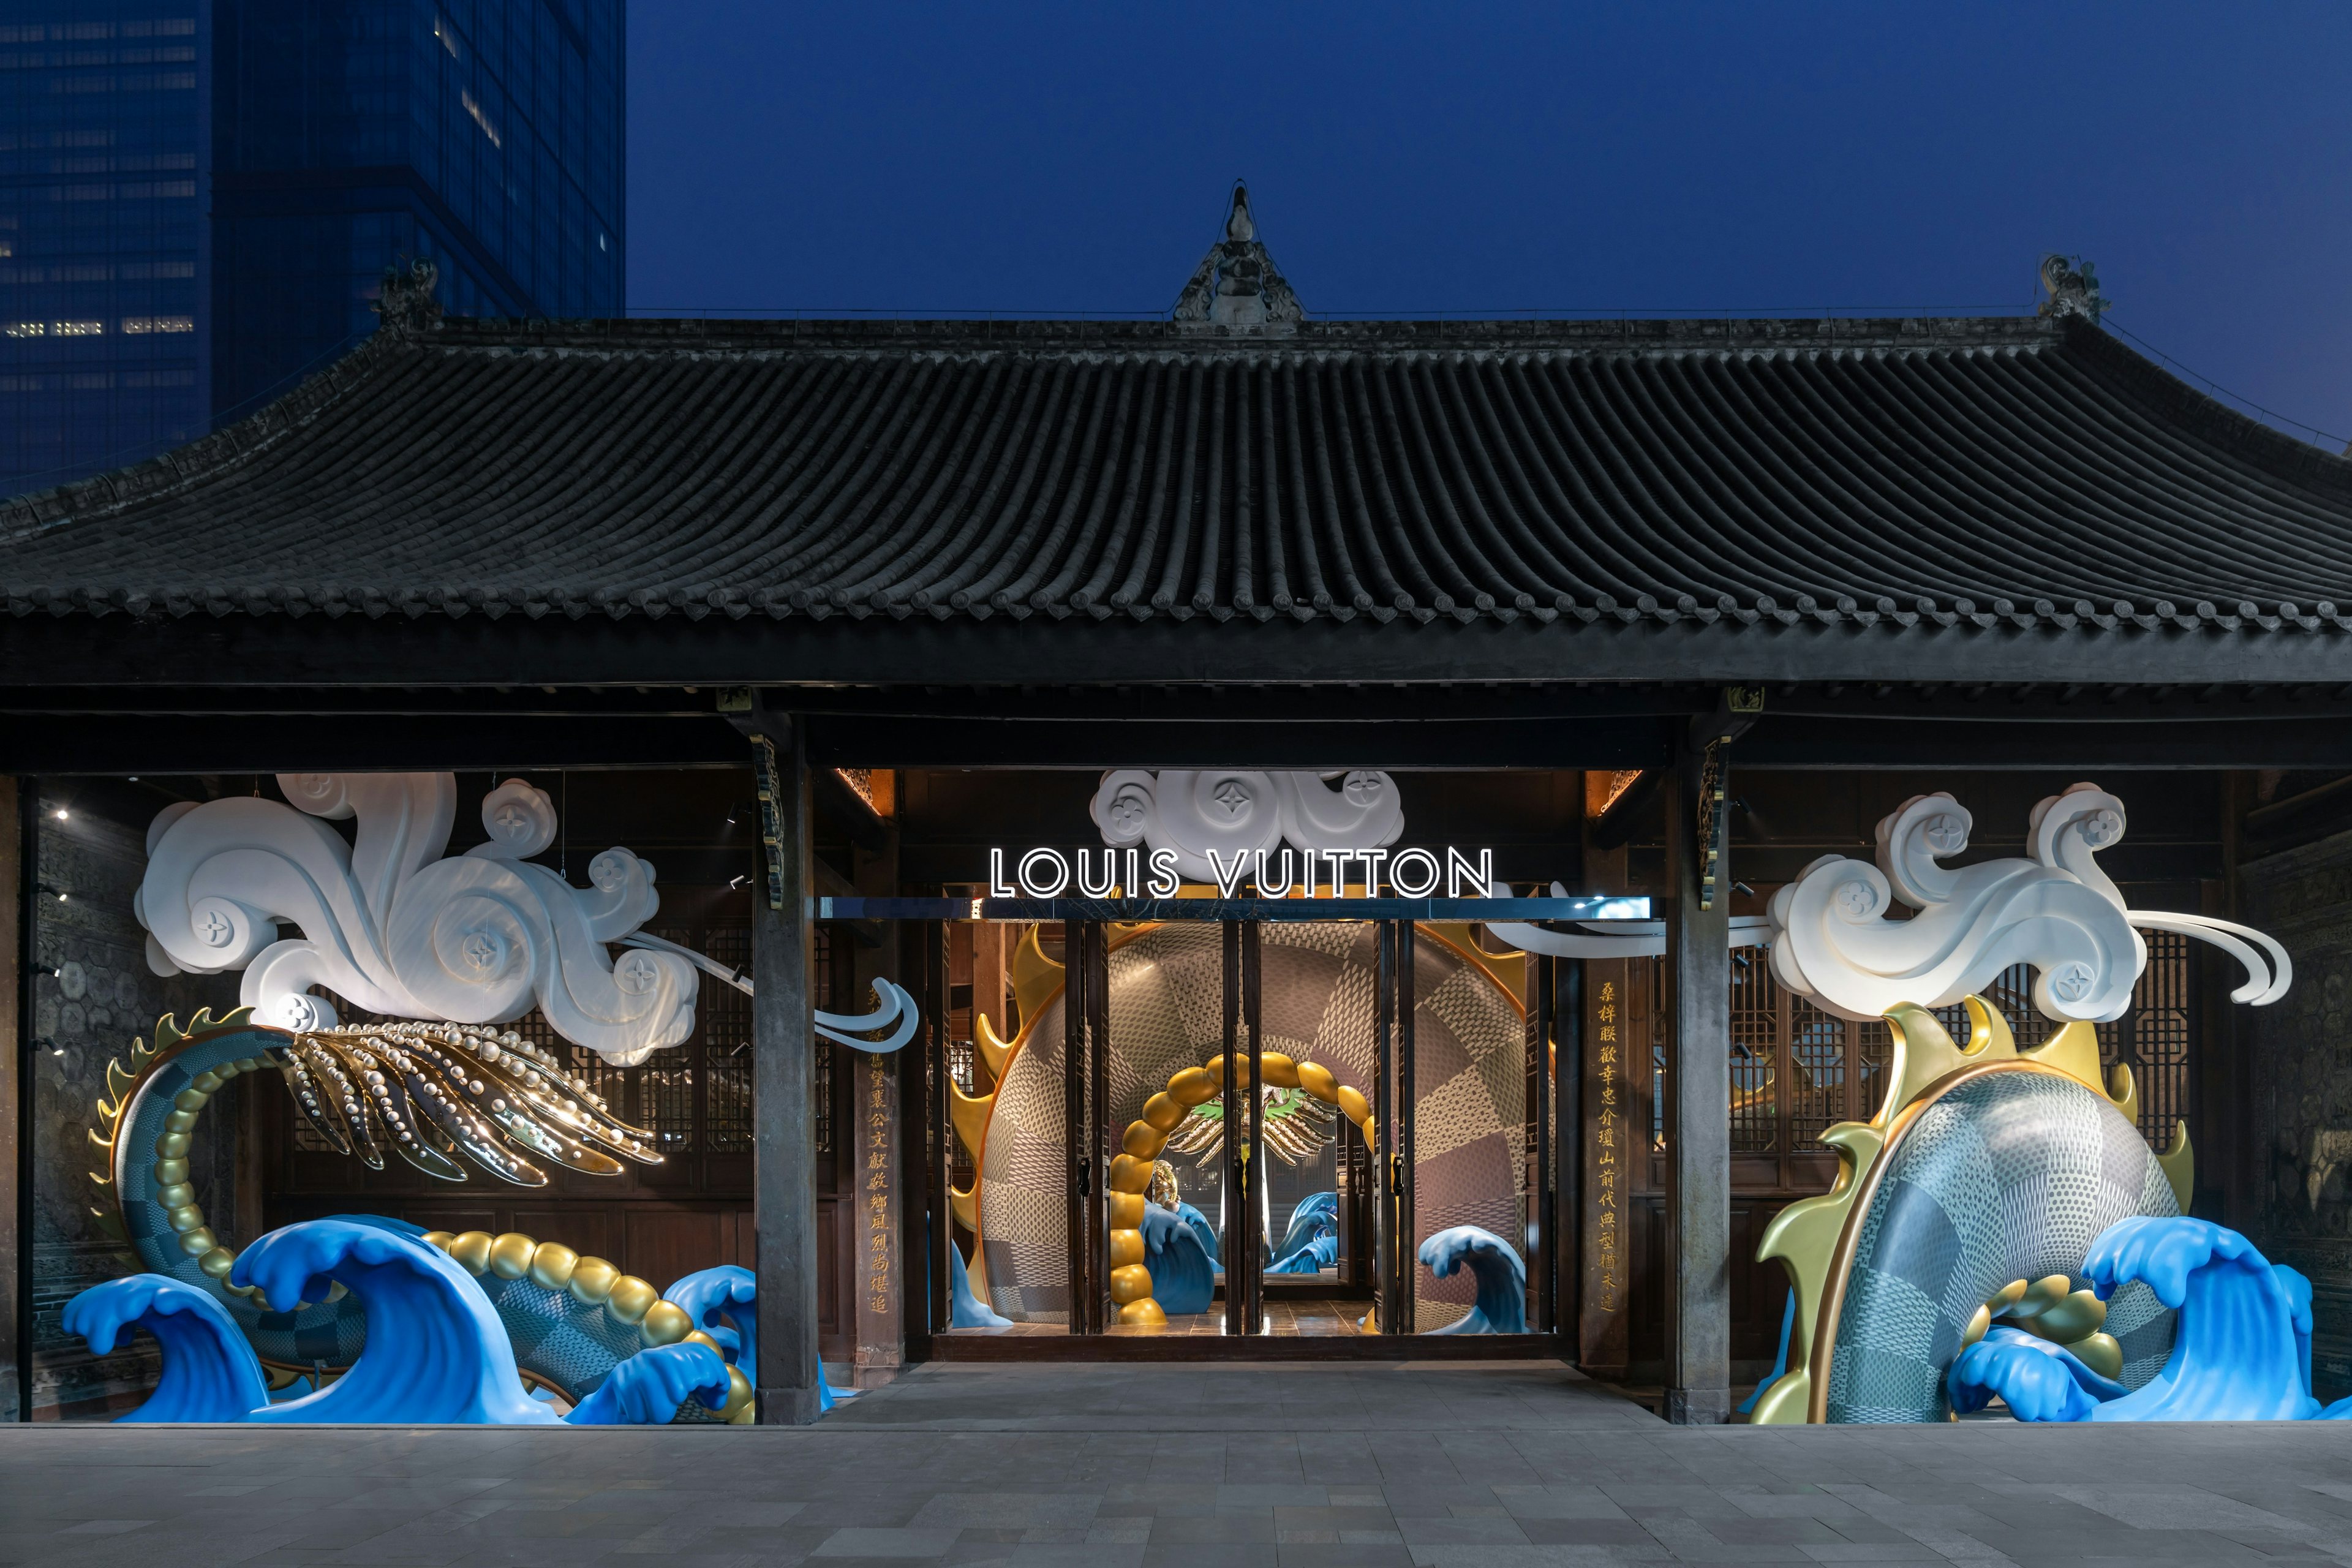 As Lunar New Year approaches, Louis Vuitton’s gilded dragon installations serve as a lesson in using localized initiatives to win over Chinese shoppers. Photo: Louis Vuitton